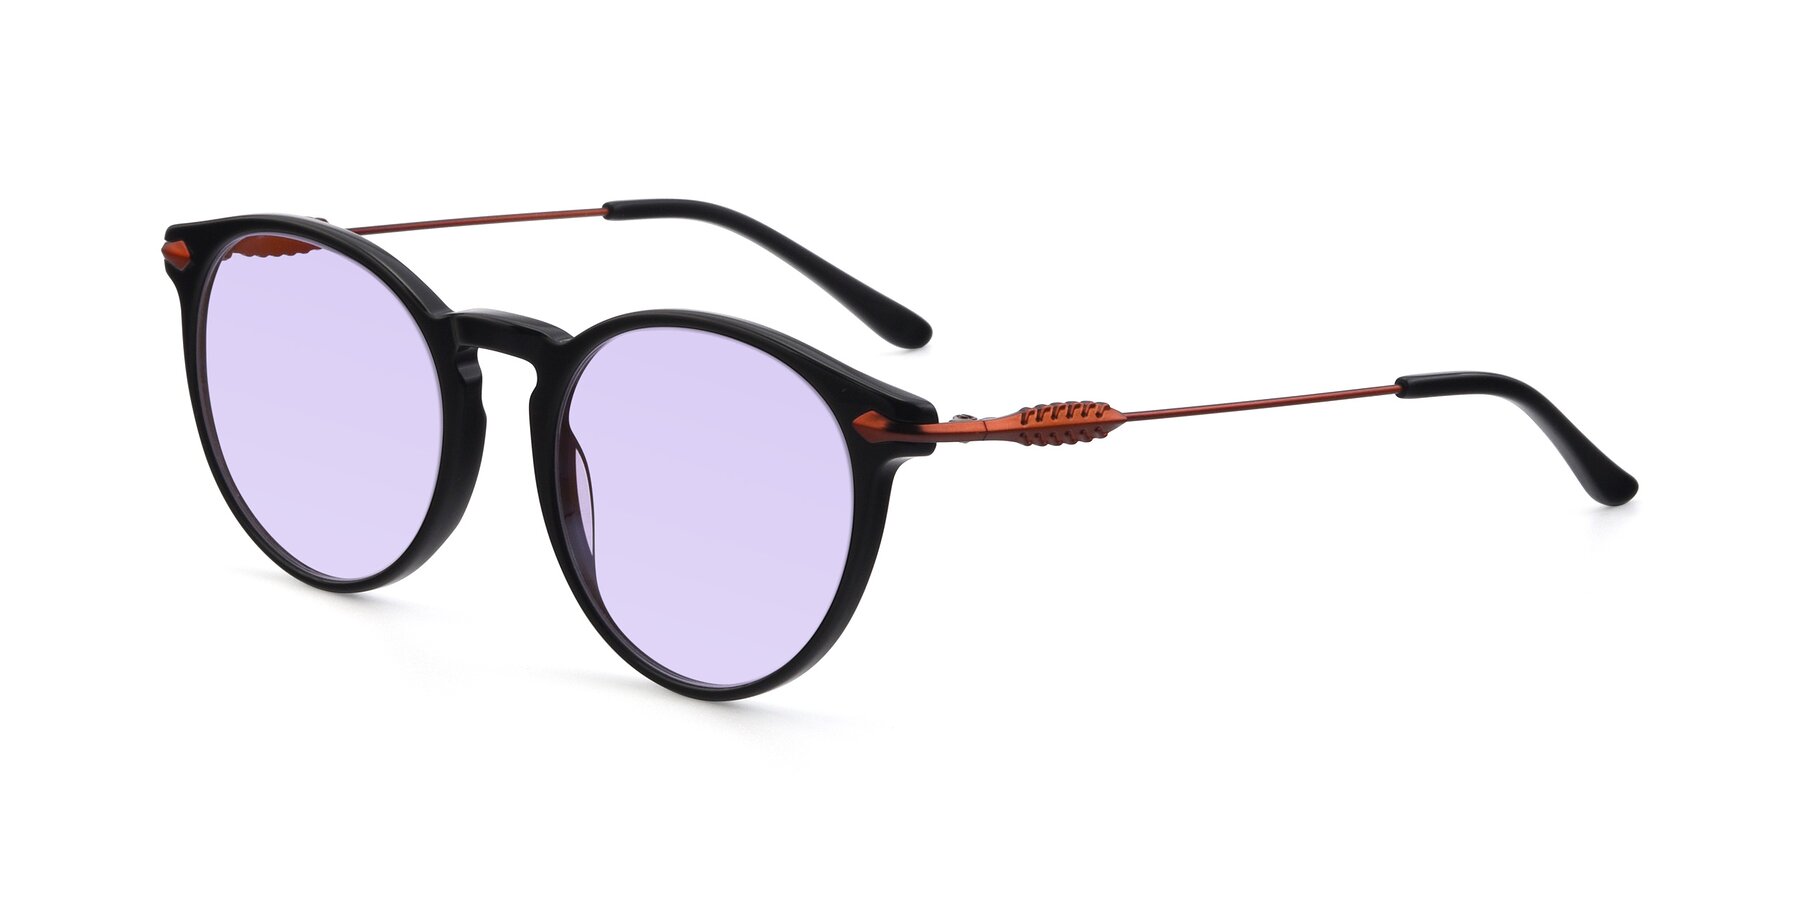 Angle of 17660 in Black with Light Purple Tinted Lenses